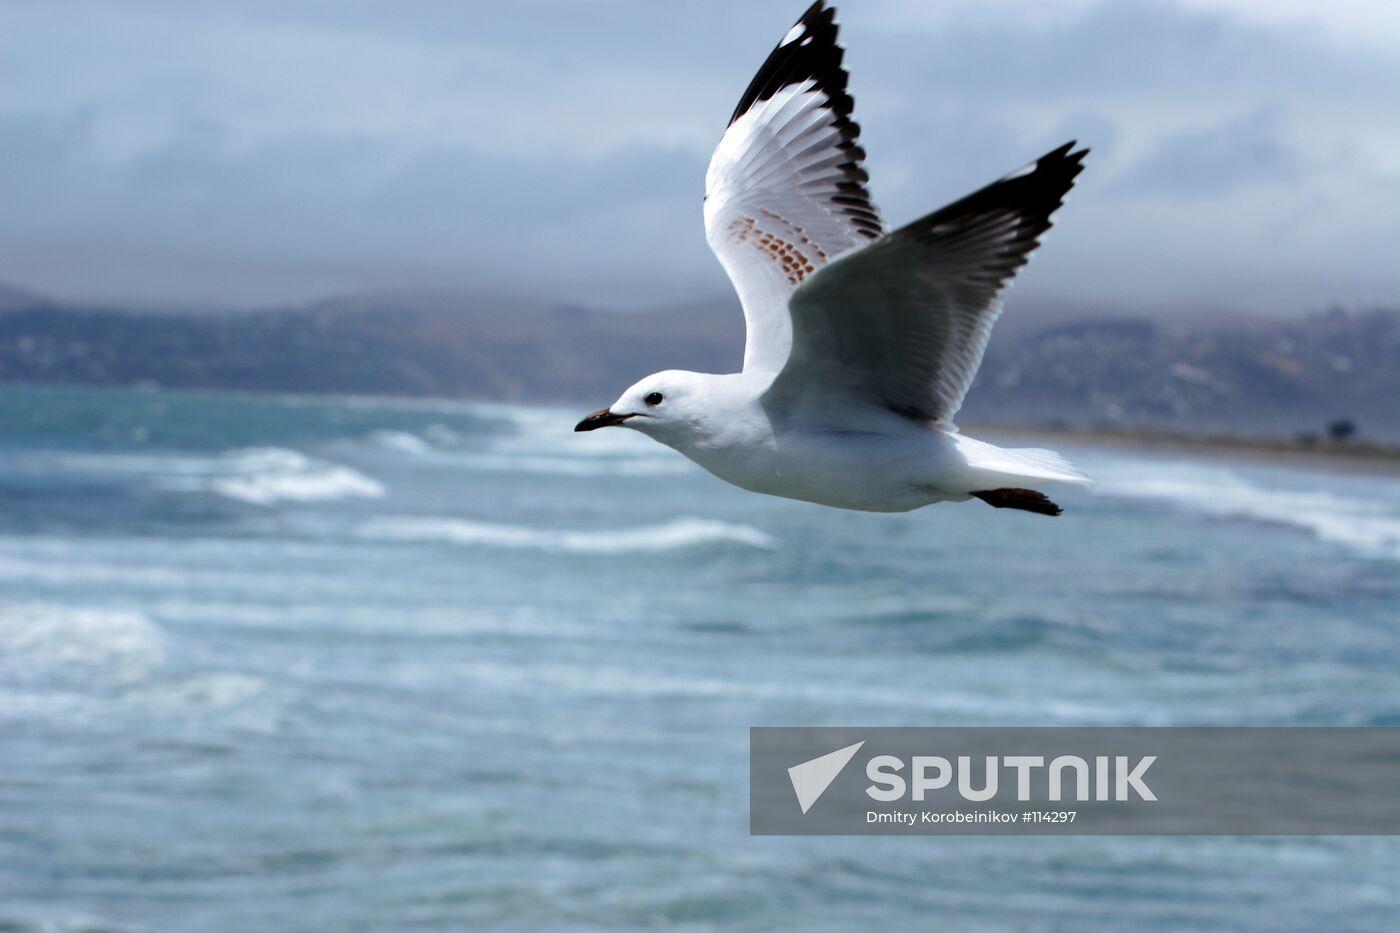 PACIFIC SEAGULL NEW ZEALAND